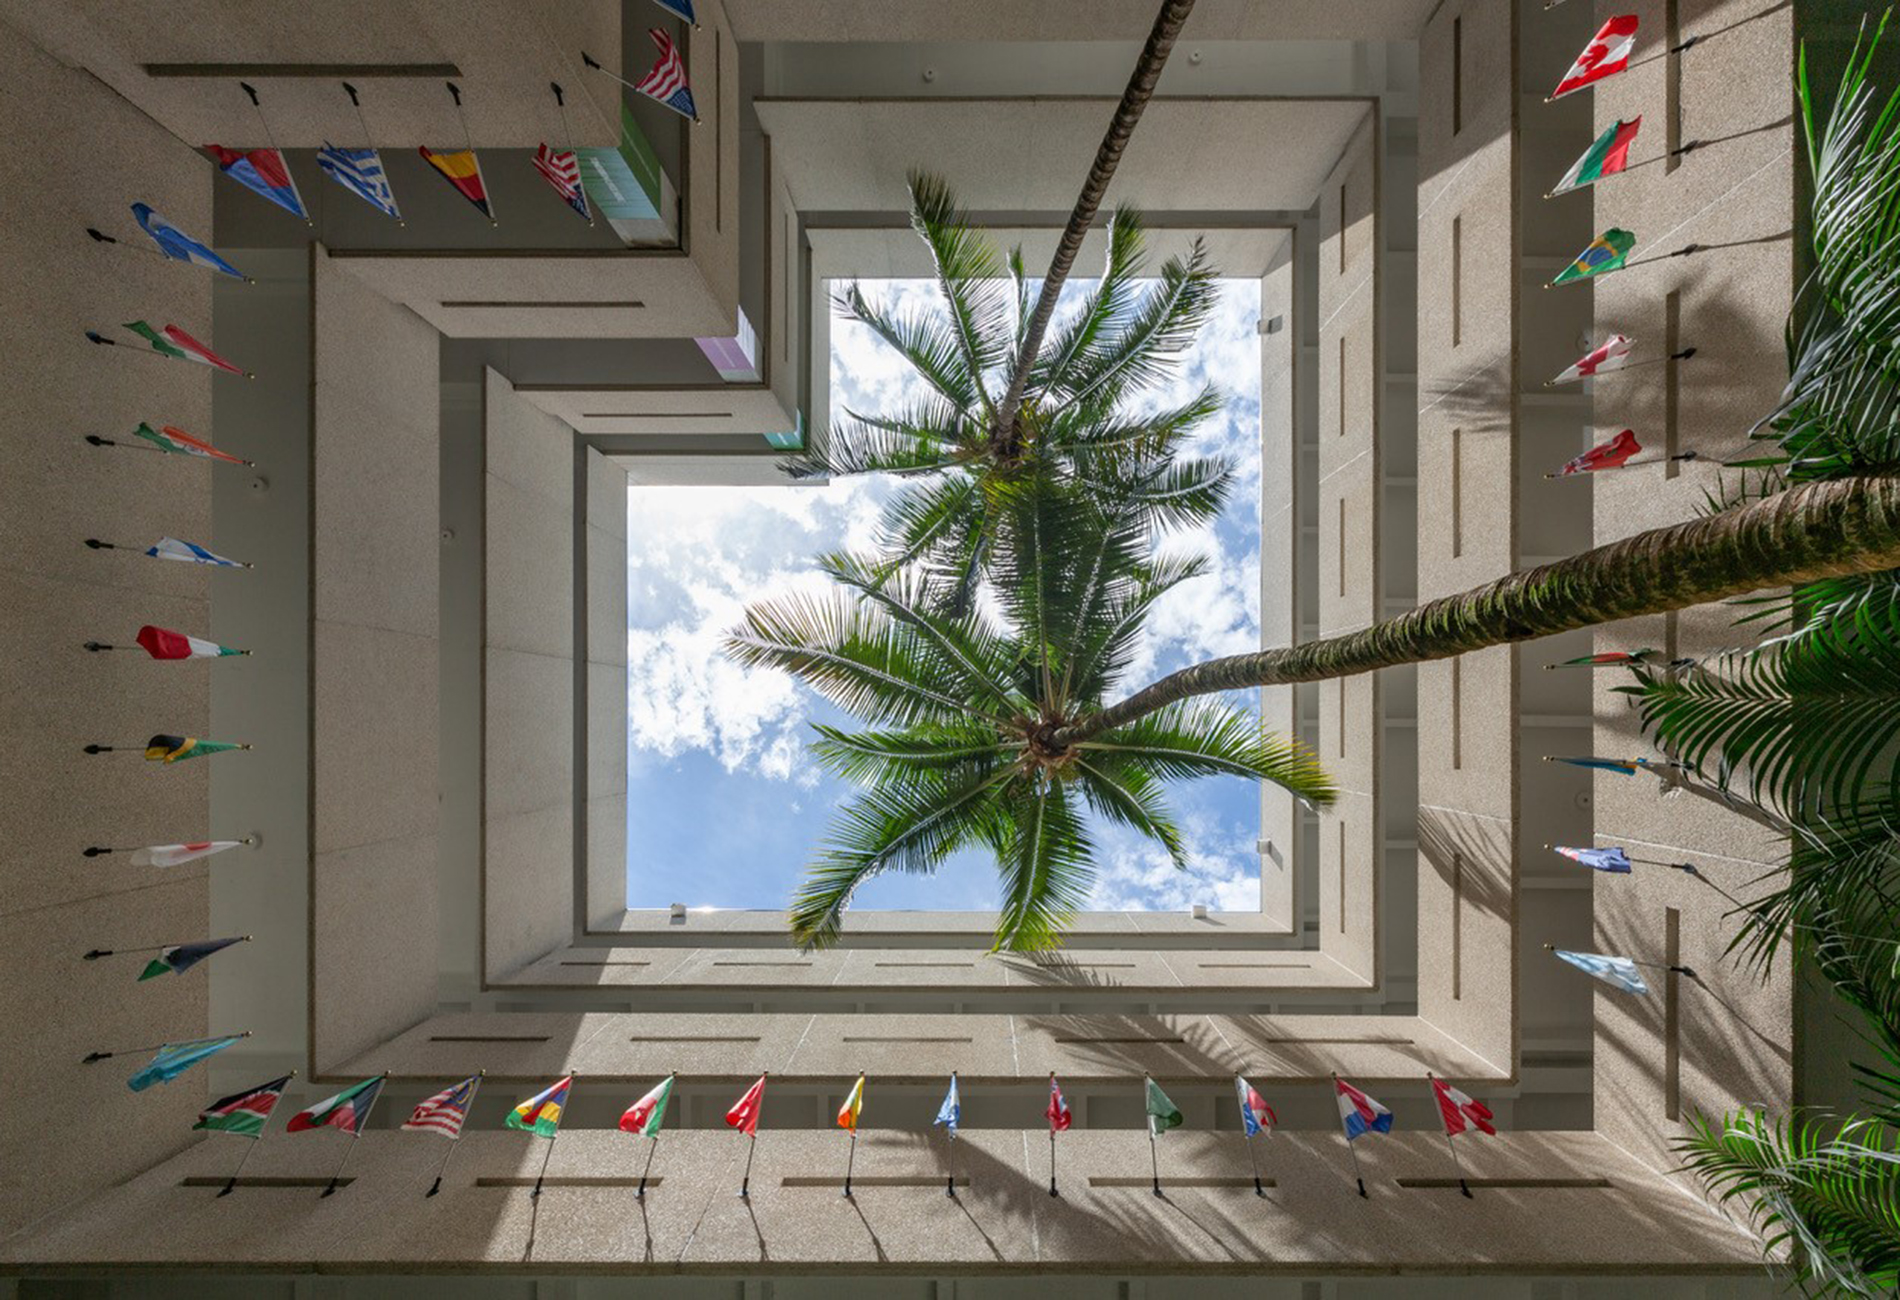 Photo from the atrium of Miami Herbert building looking up at palm trees and world flags.